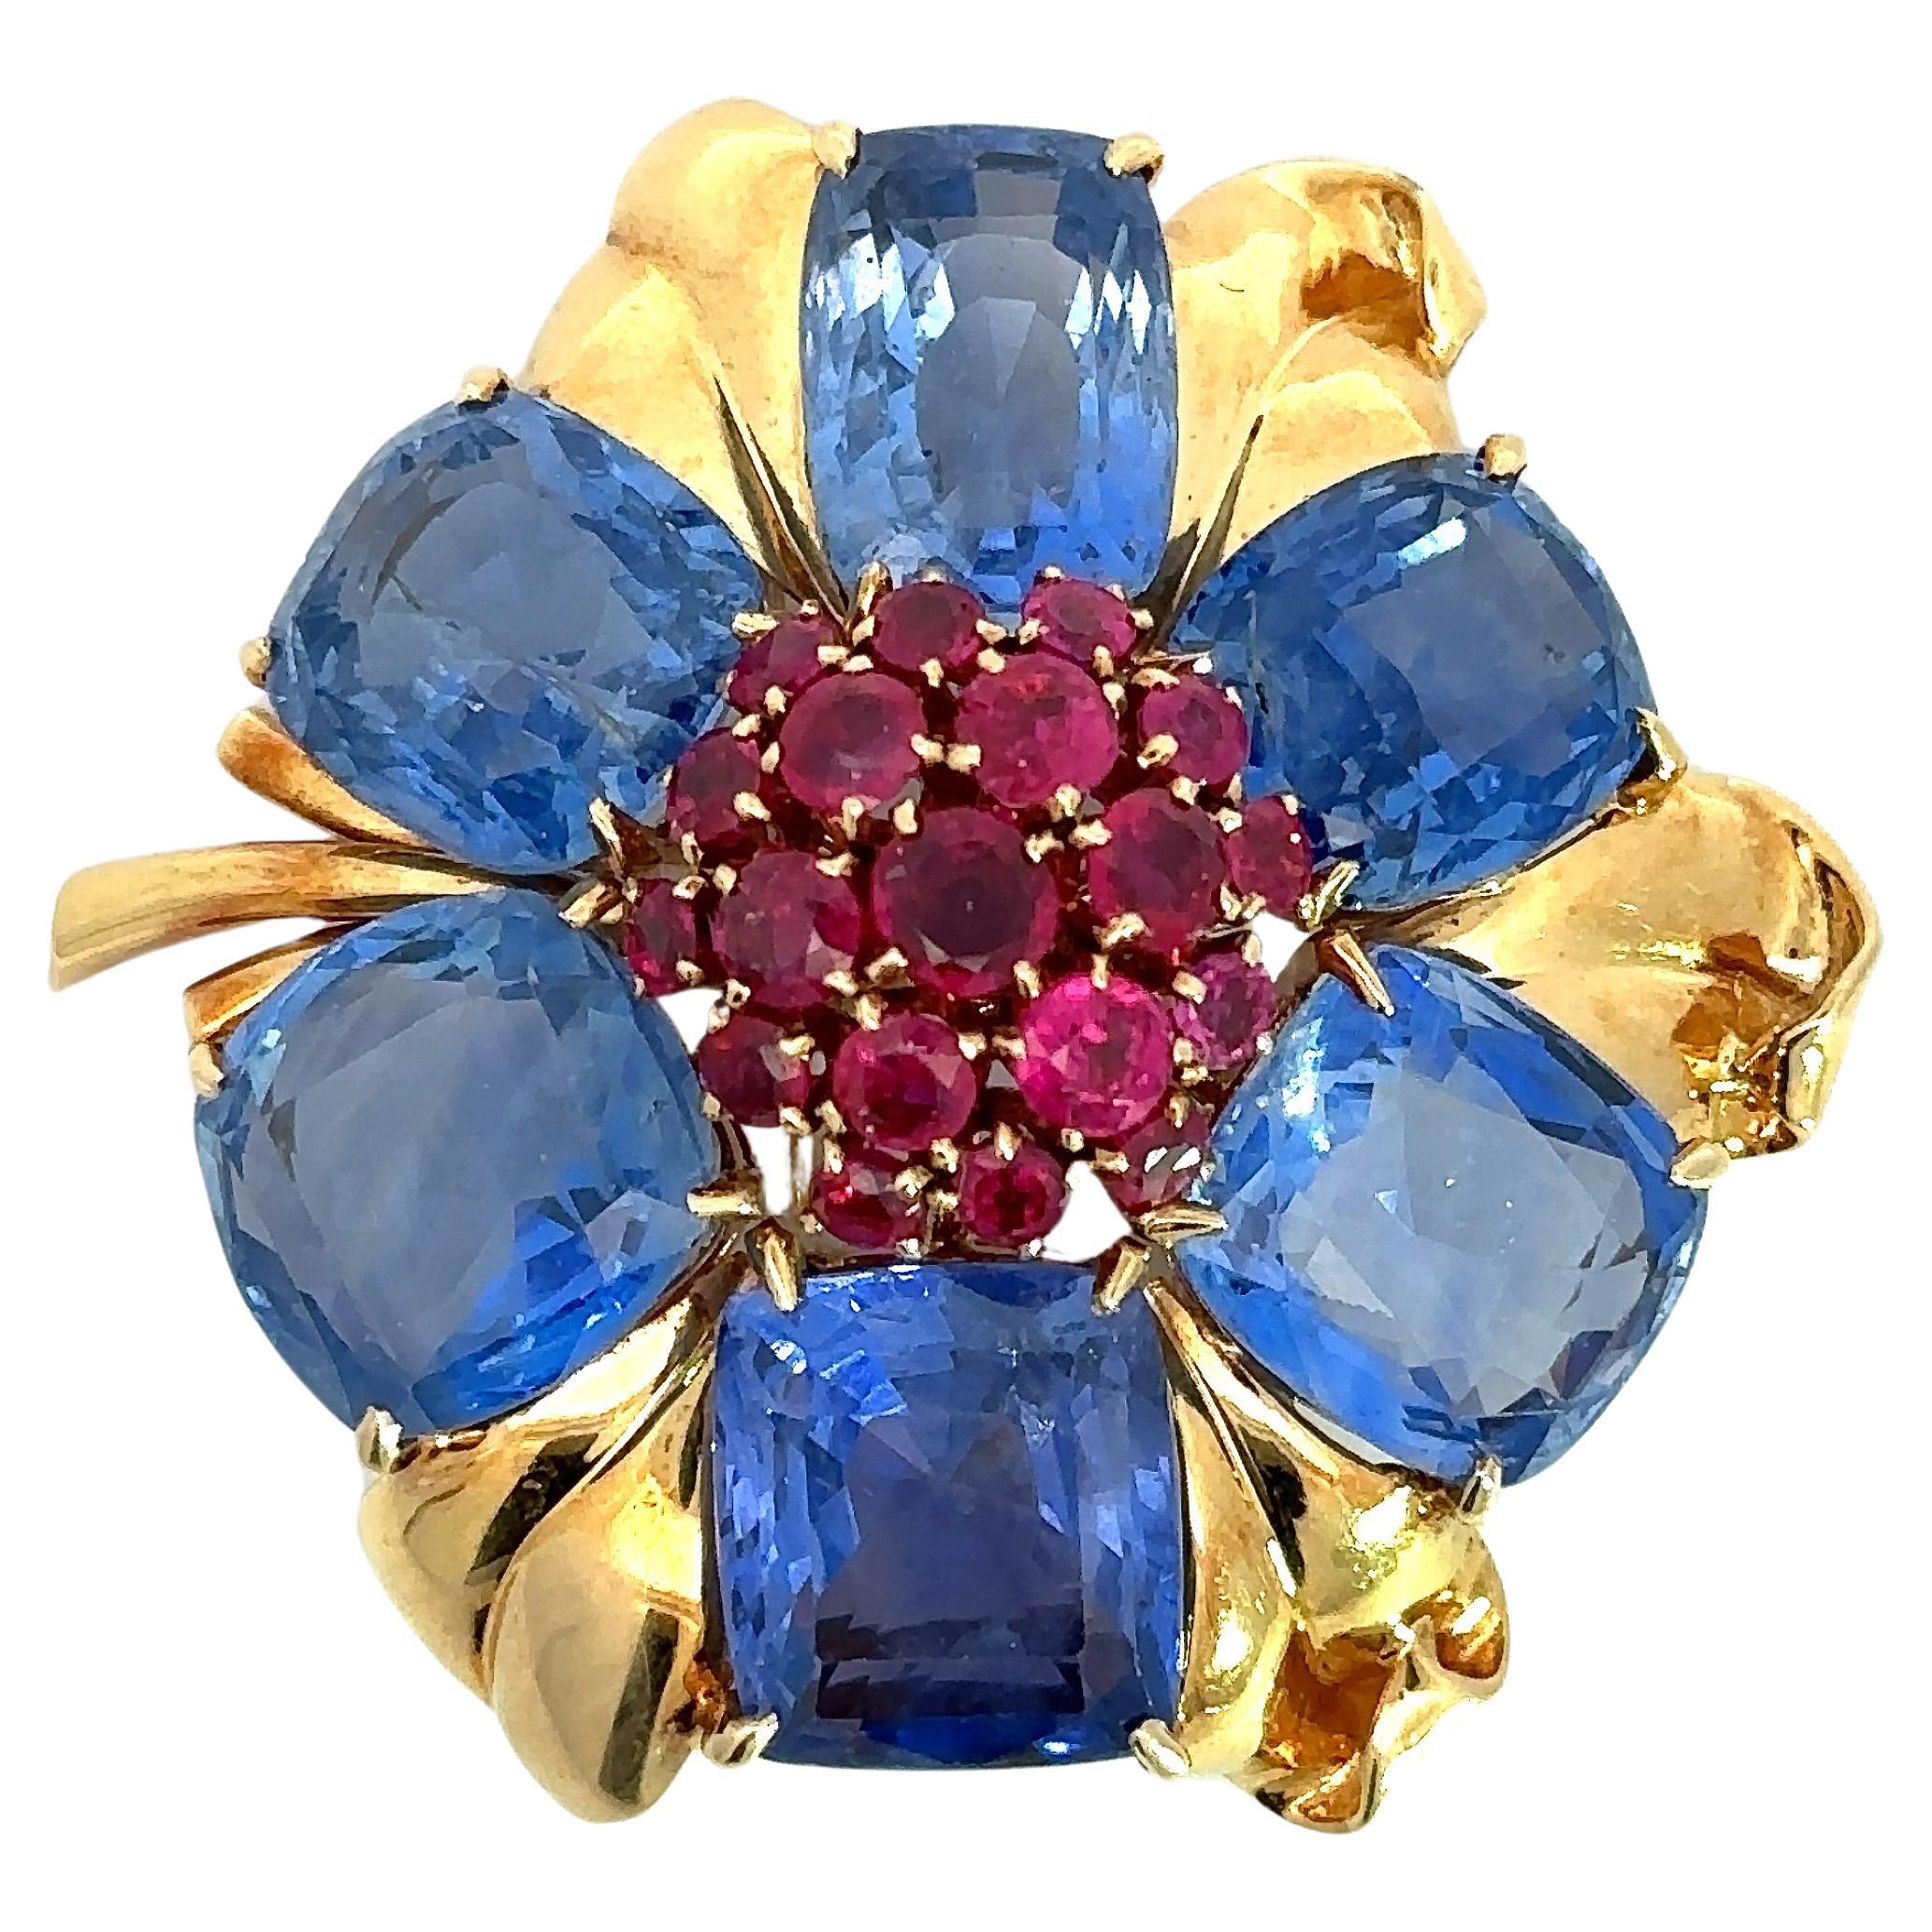 Vintage Van Cleef & Arpels Blue Sapphire & Ruby Brooch, 18KT Yellow Gold For Sale